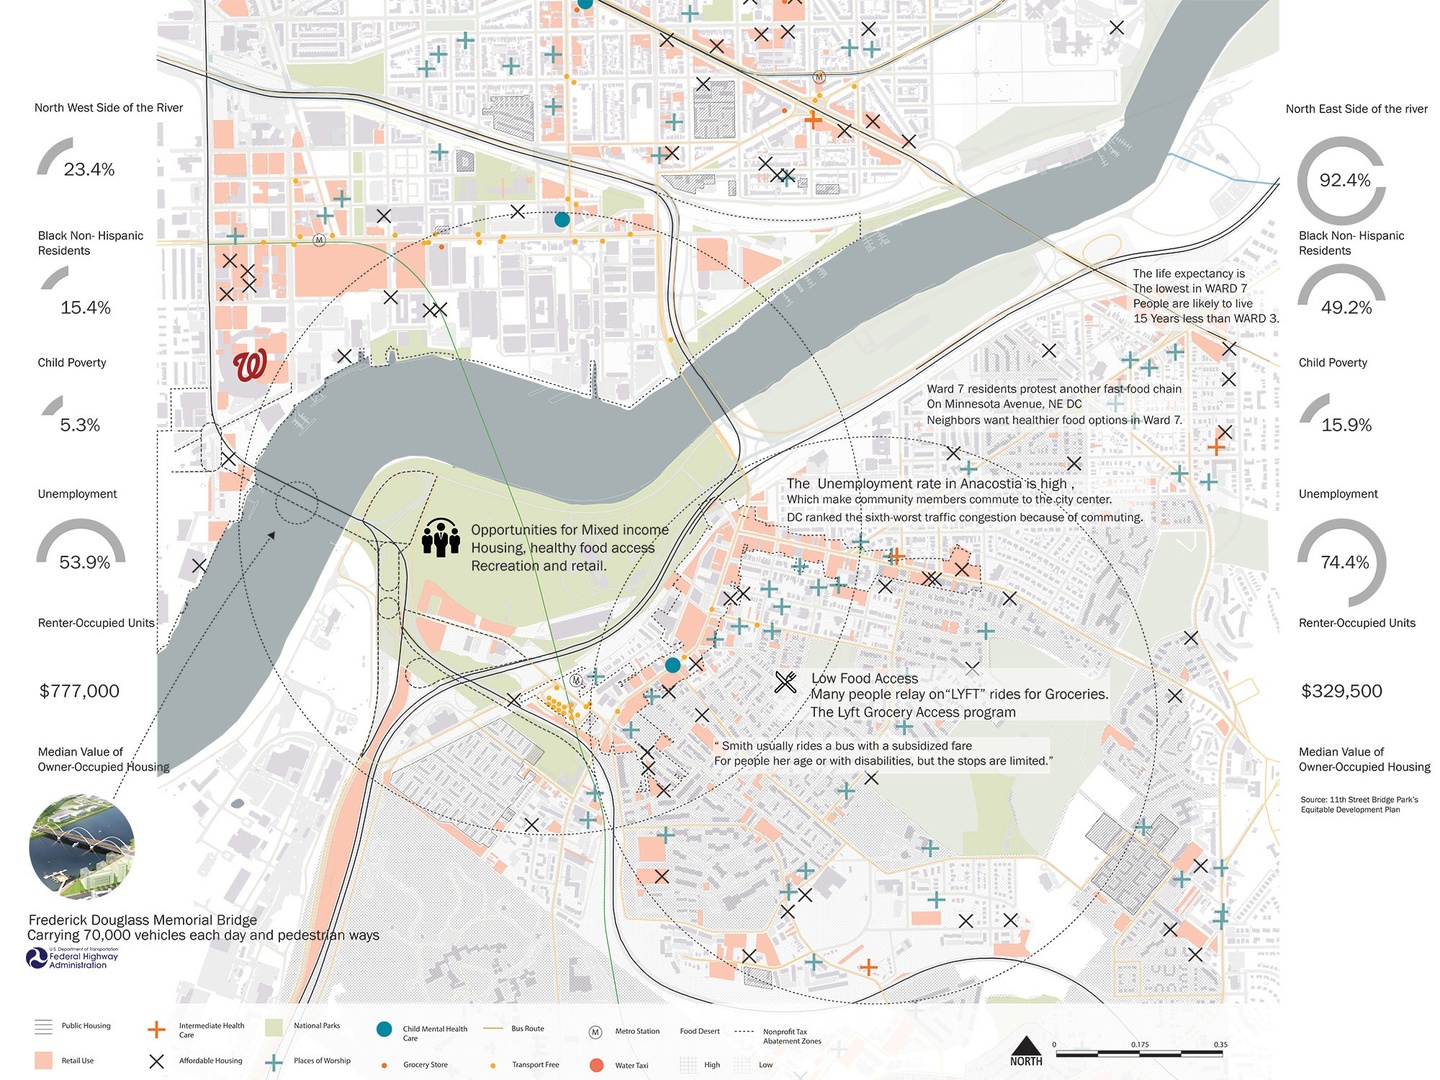 Map of Poplar Point in Washington DC depicting income, affordable housing and other points of interest